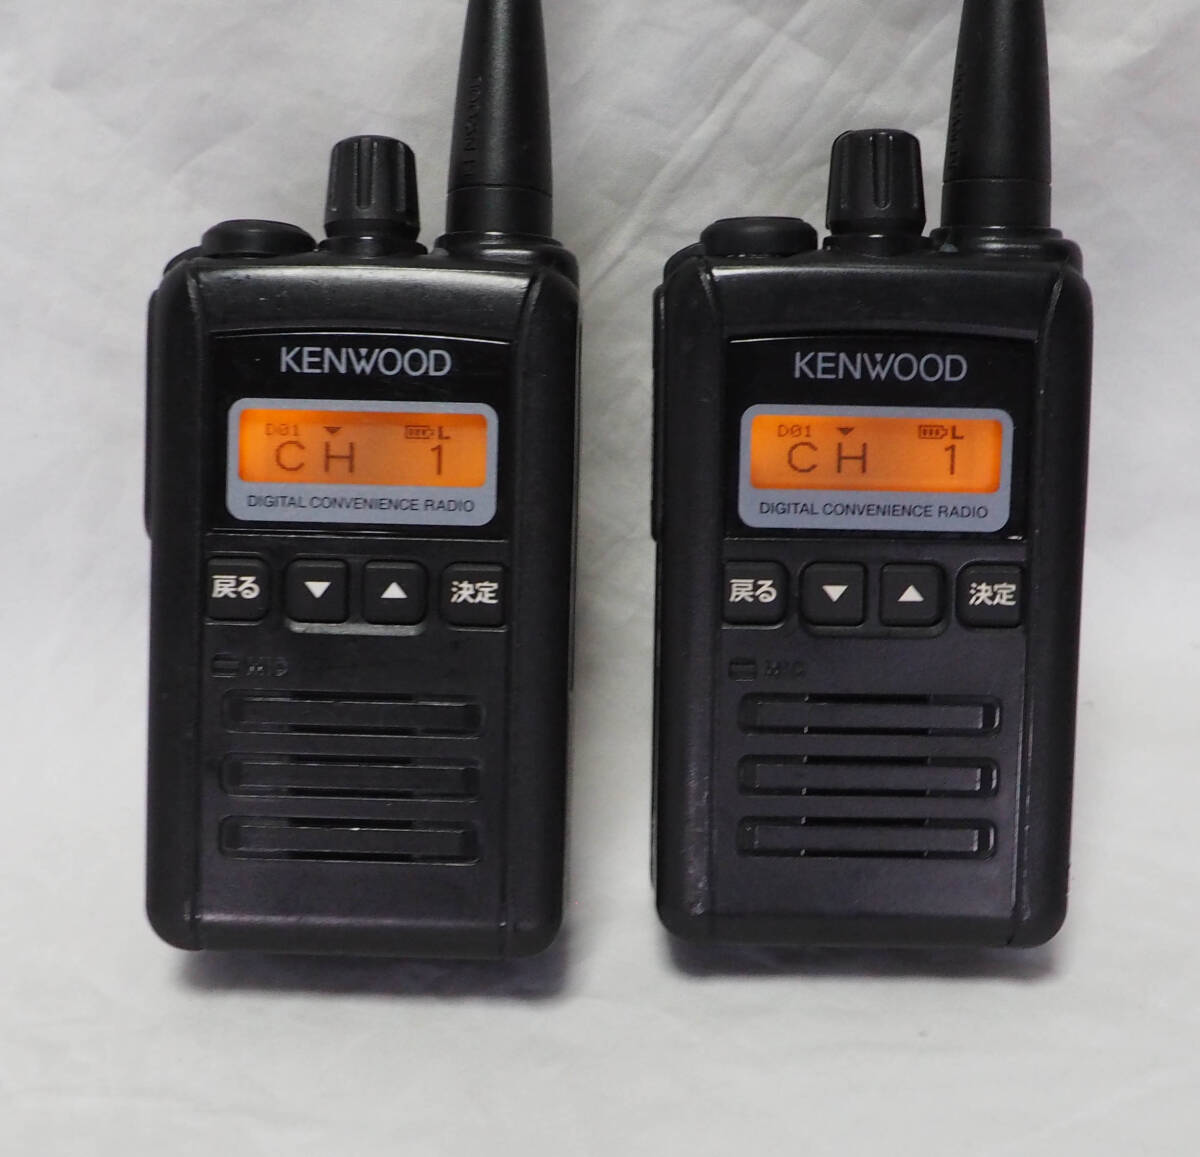  normal operation *KENWOOD Kenwood TCP-D251C 5W digital simple wireless 2 pcs. set with charger 